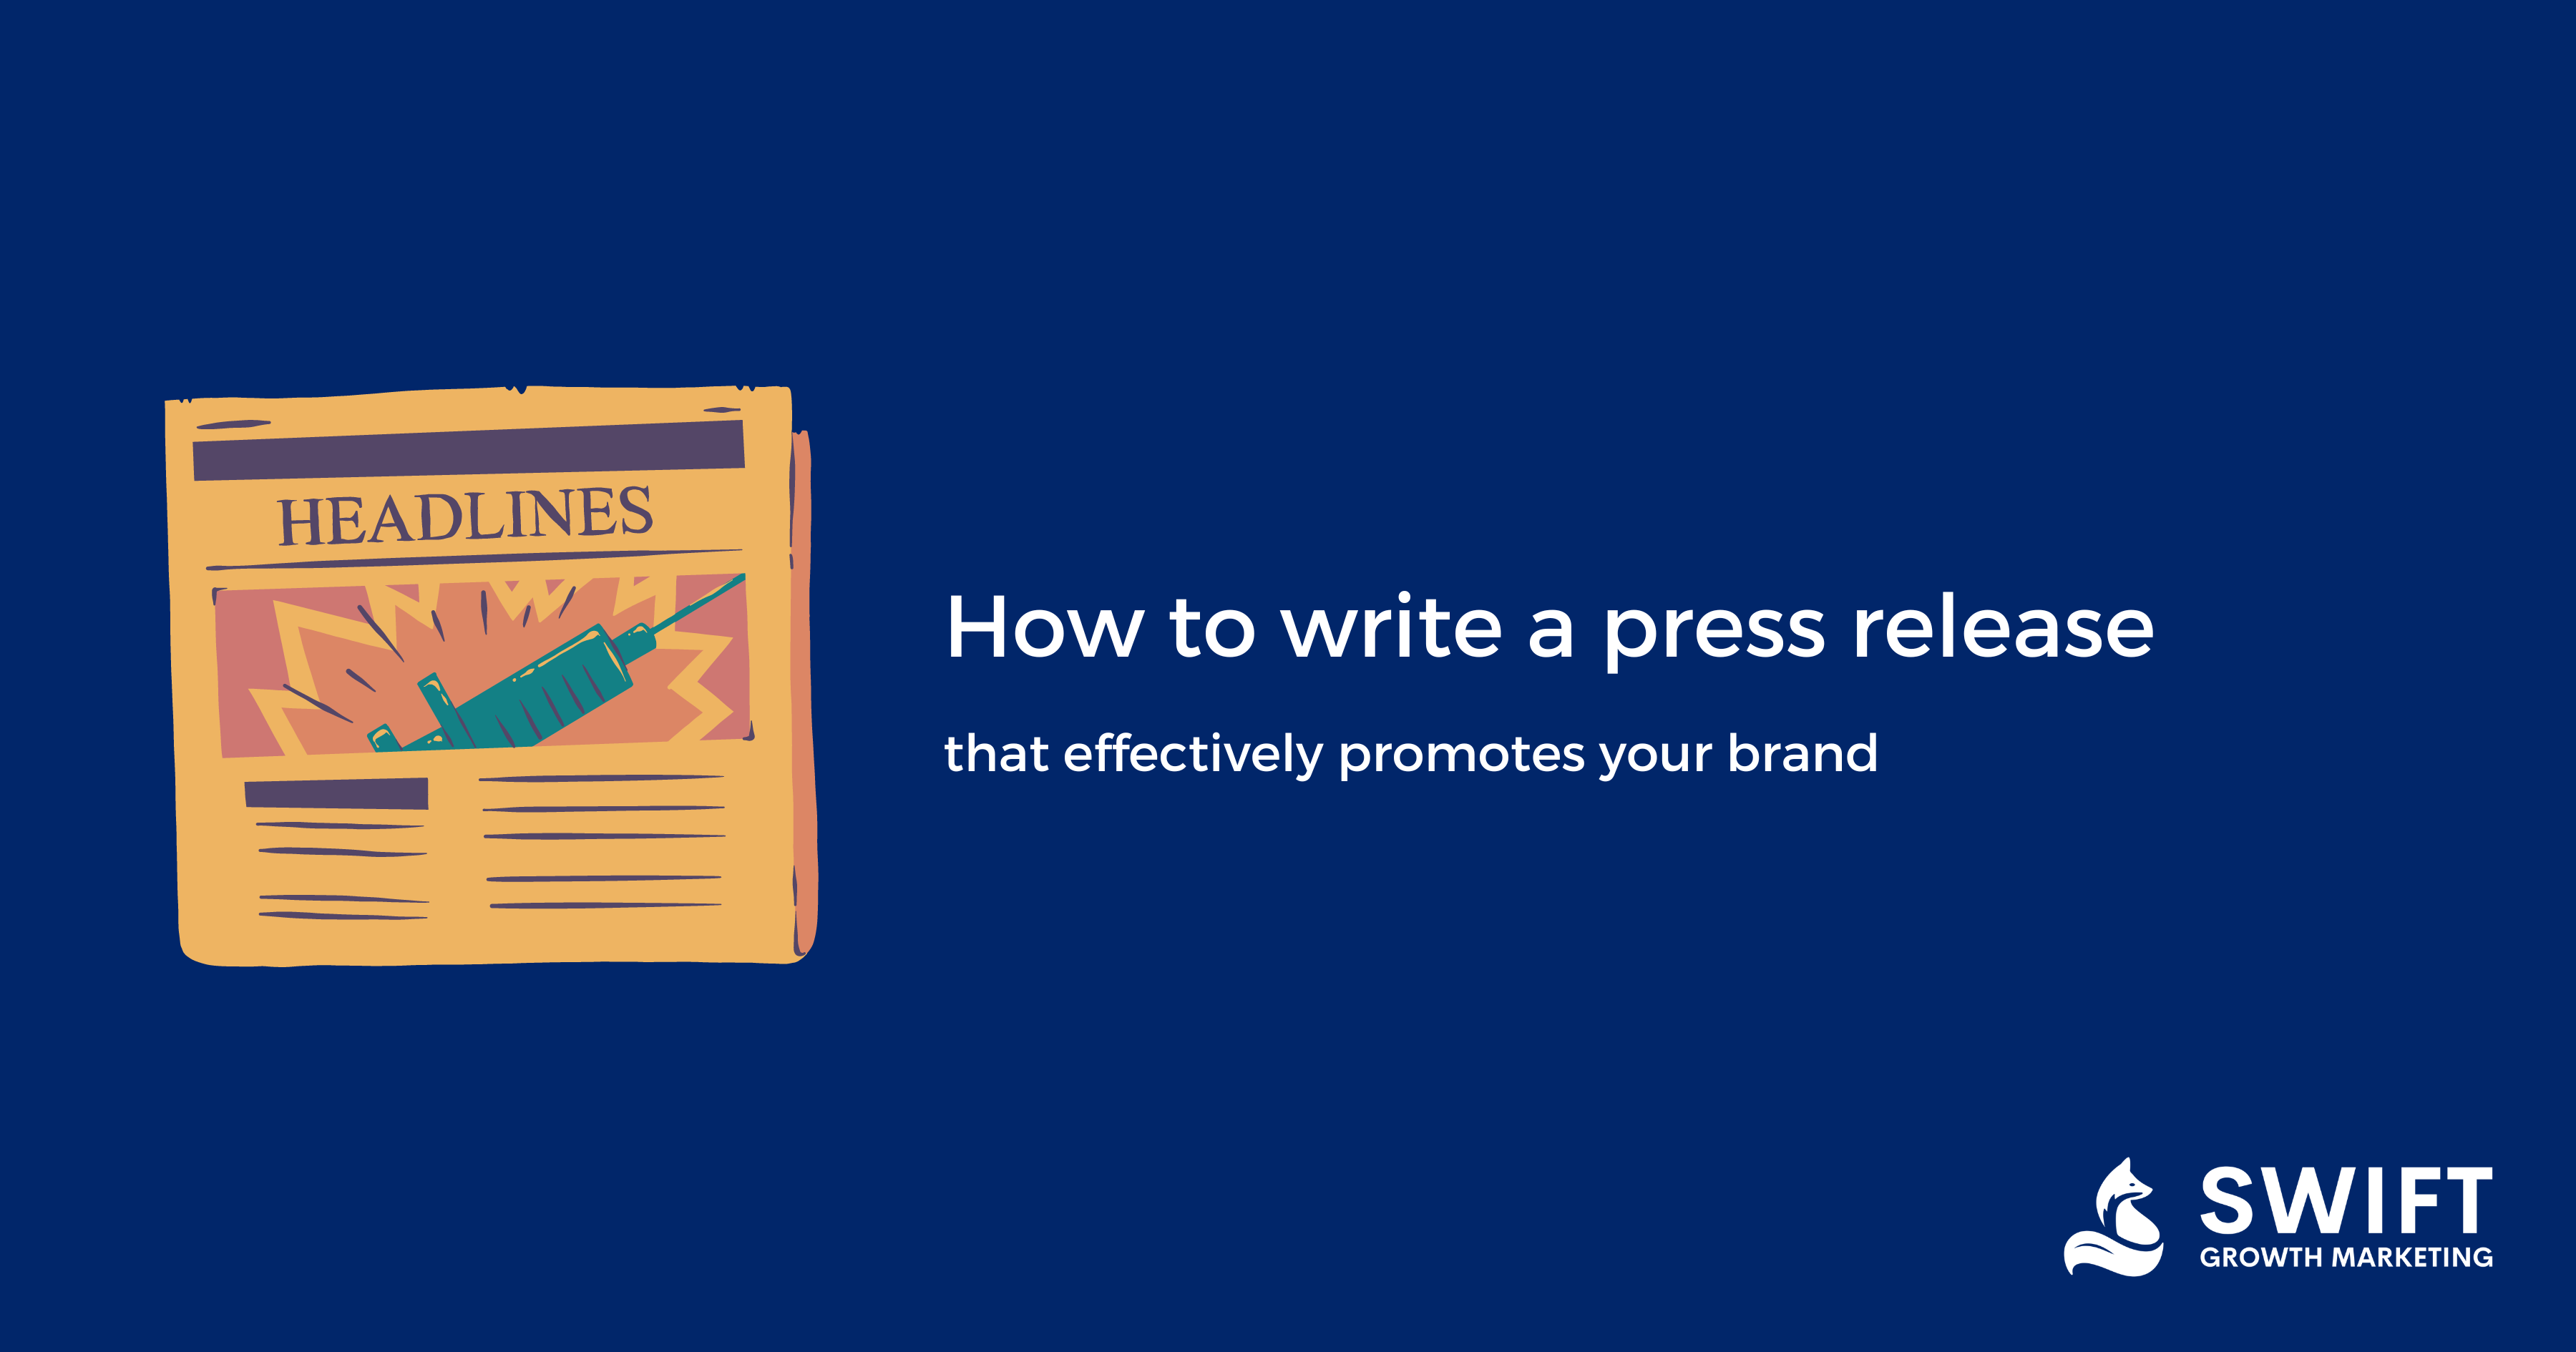 How to write a press release that effectively promotes your brand